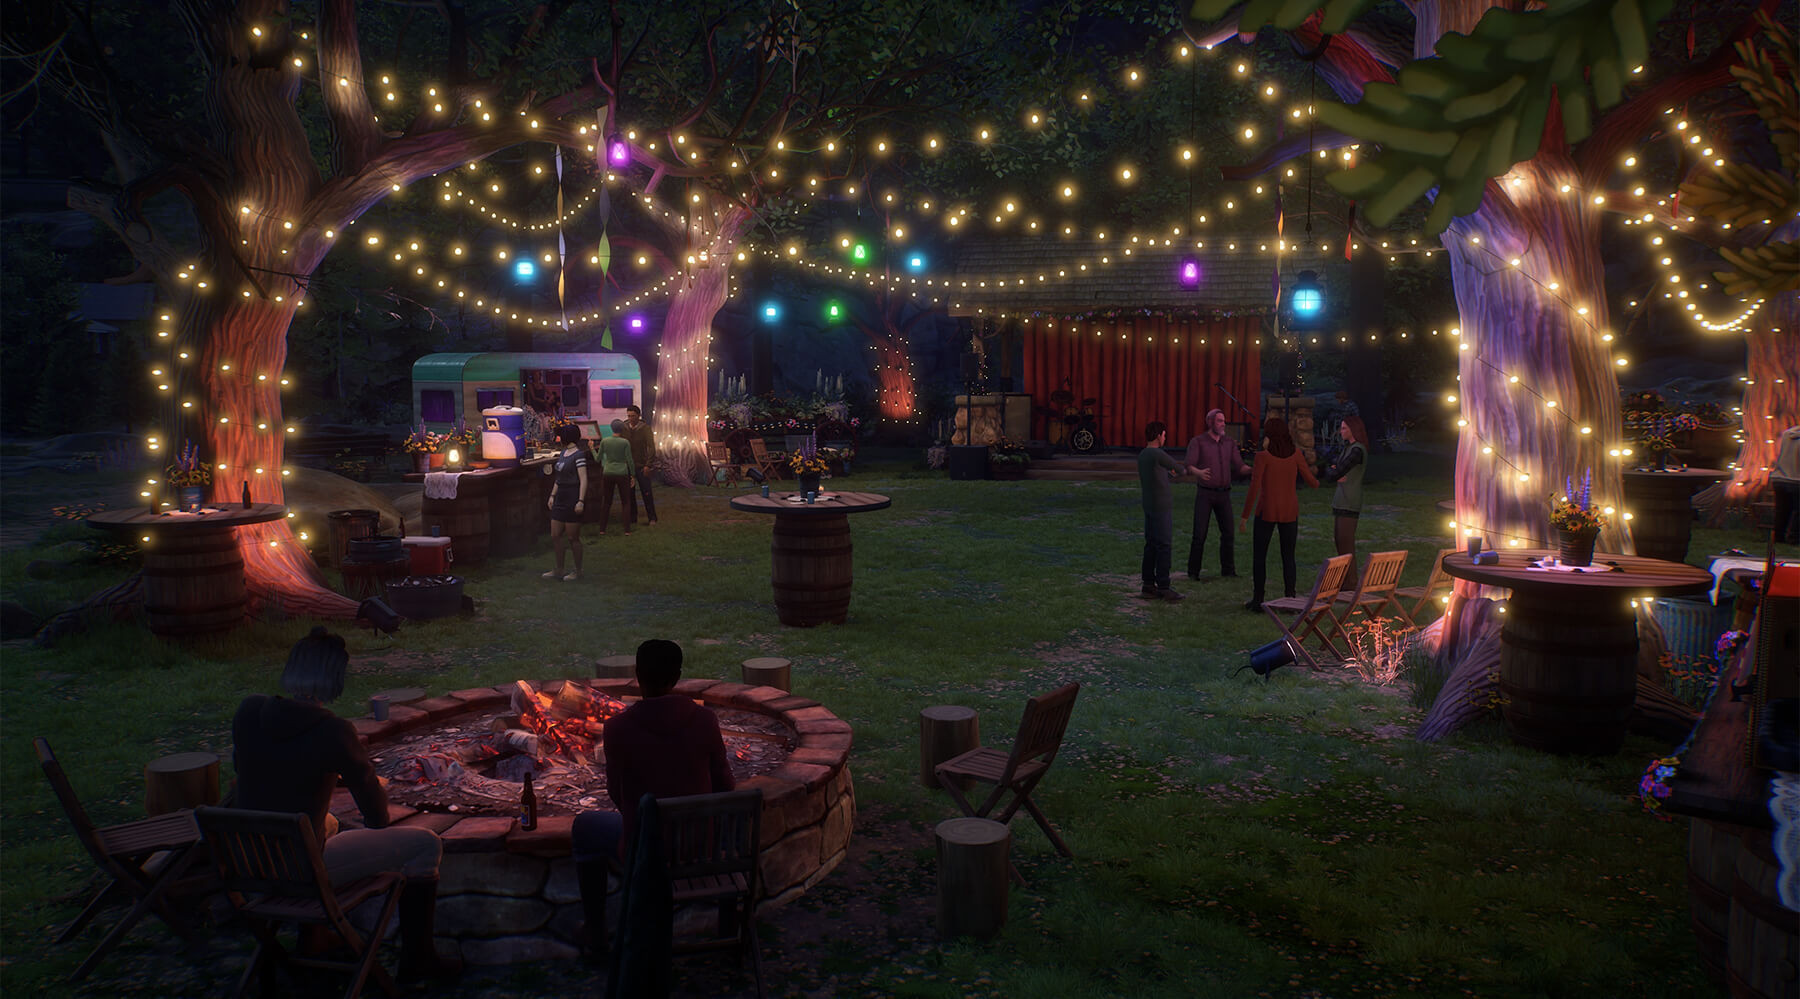 An outdoor nighttime party full of Haven Springs residents.